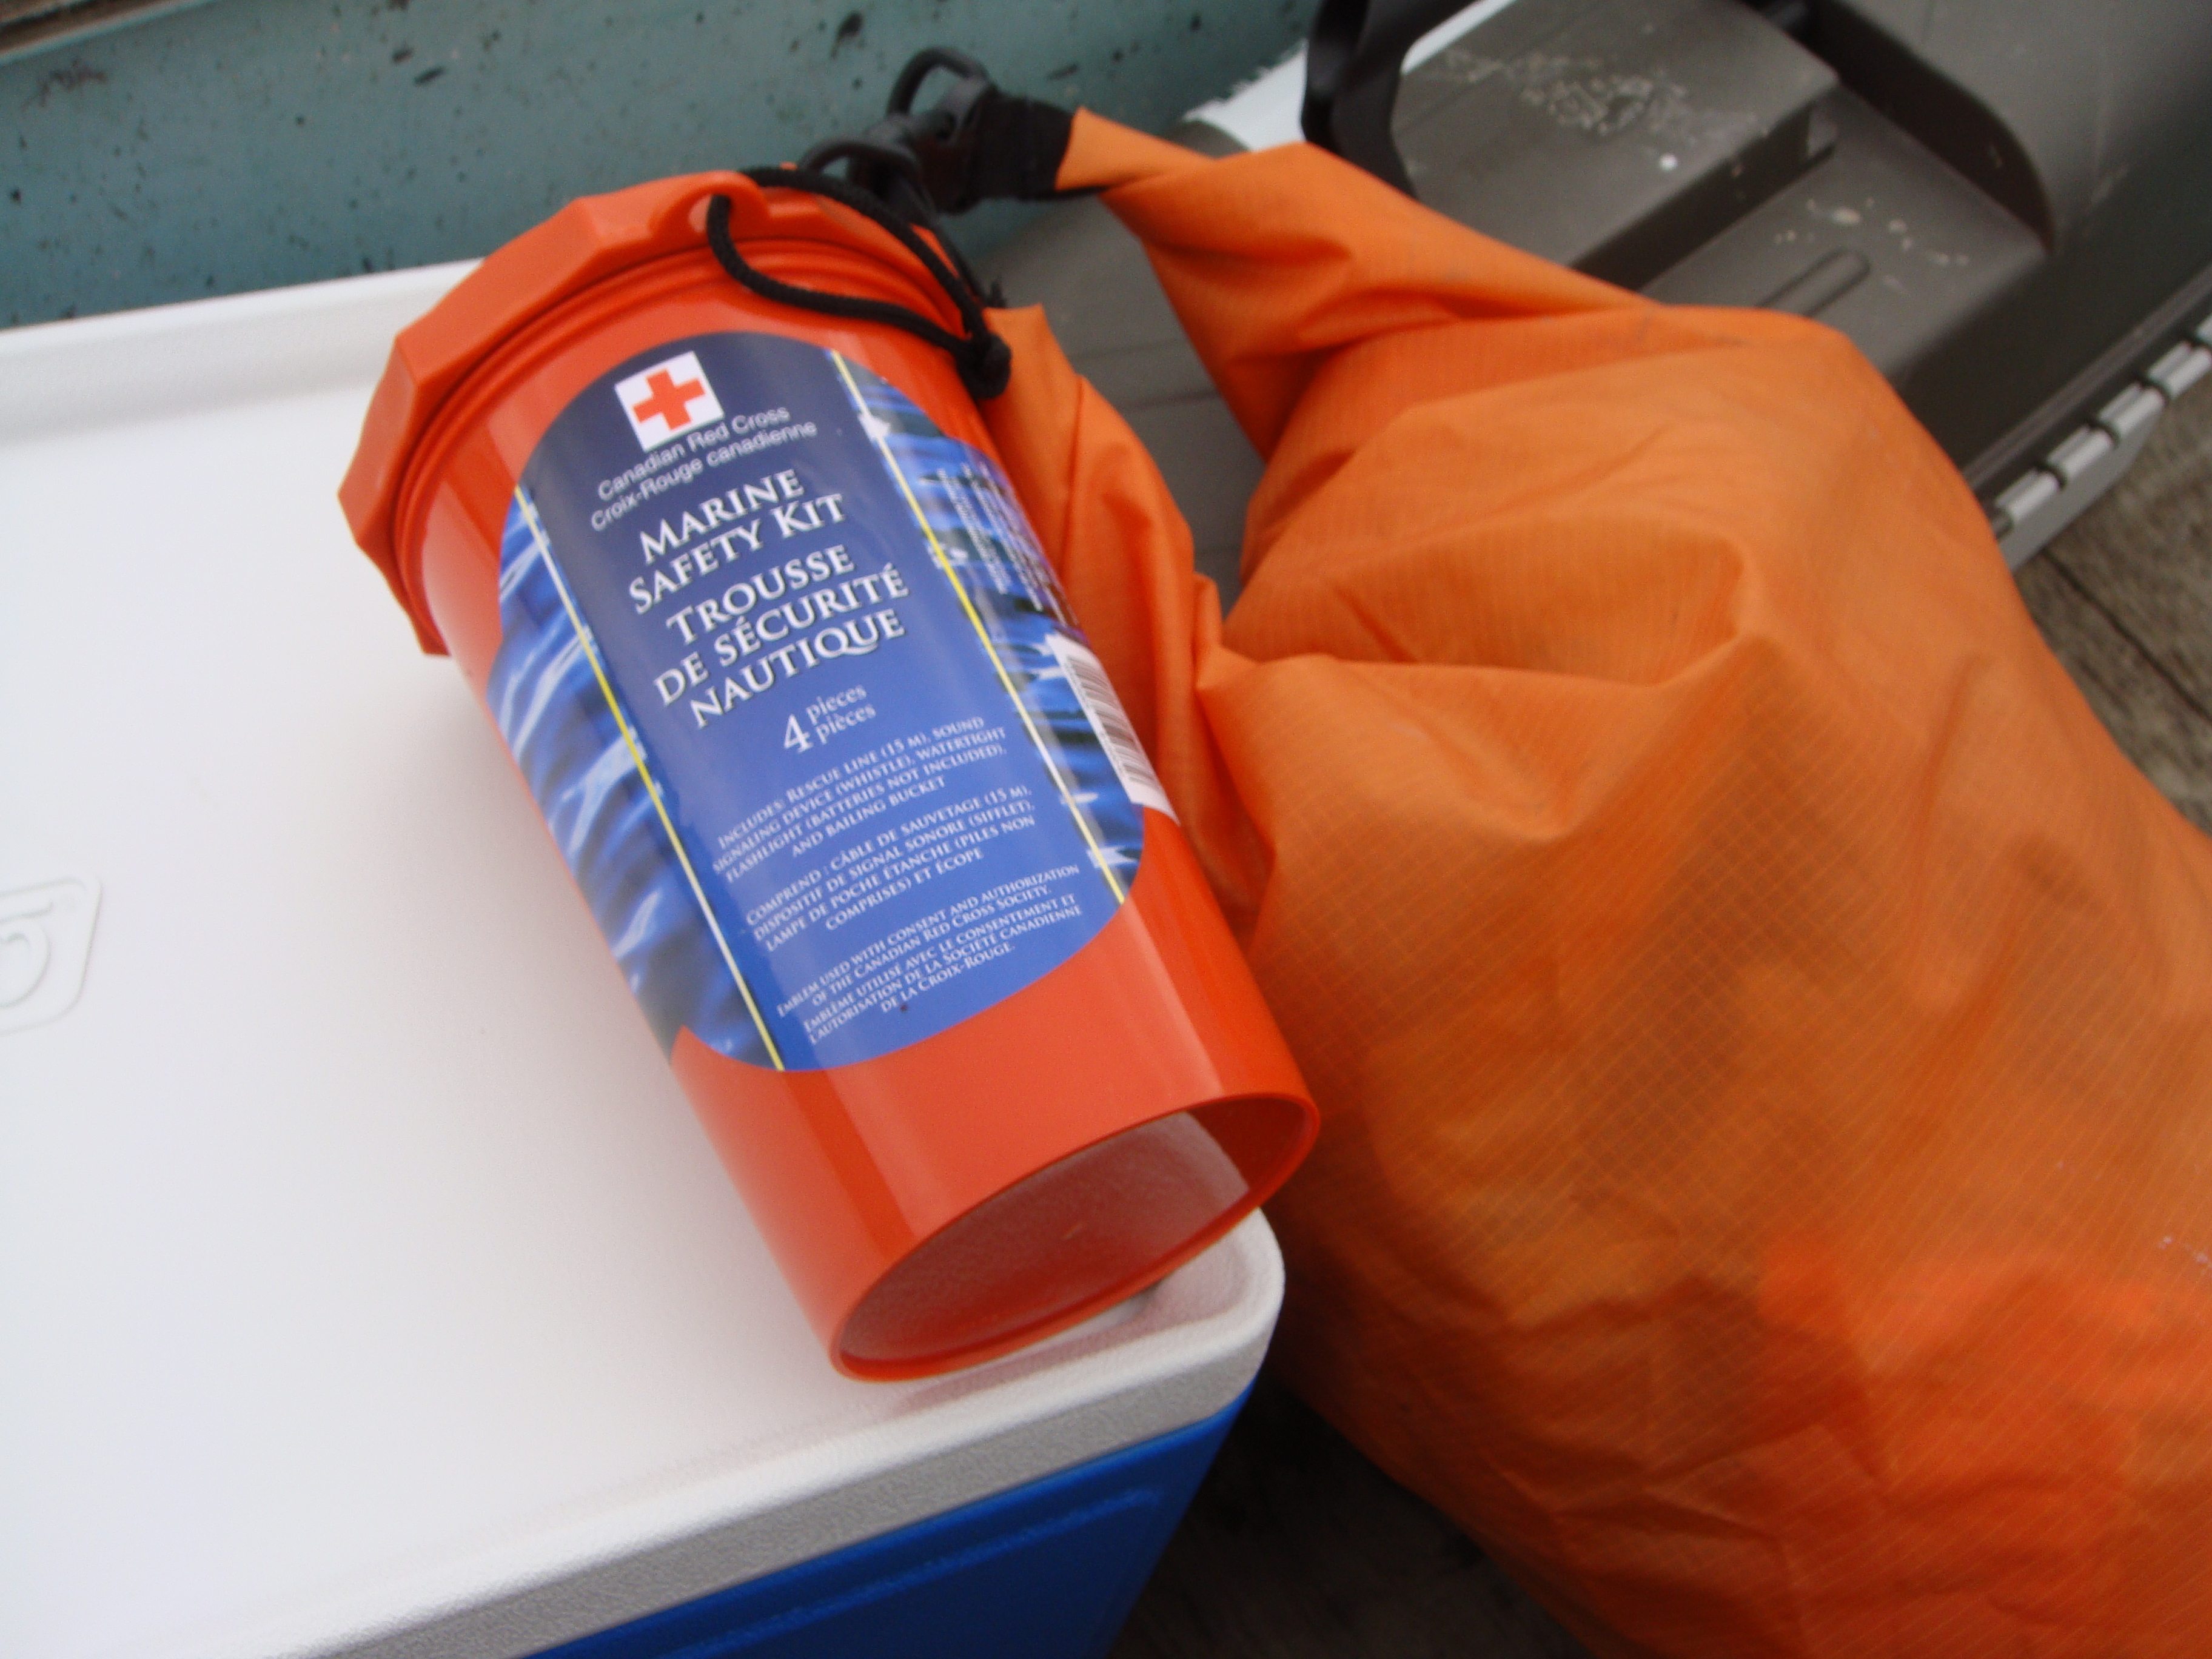 This is Red Crosser Melanie Goodchild-Southwind's marine first aid kit that she keeps on her boat